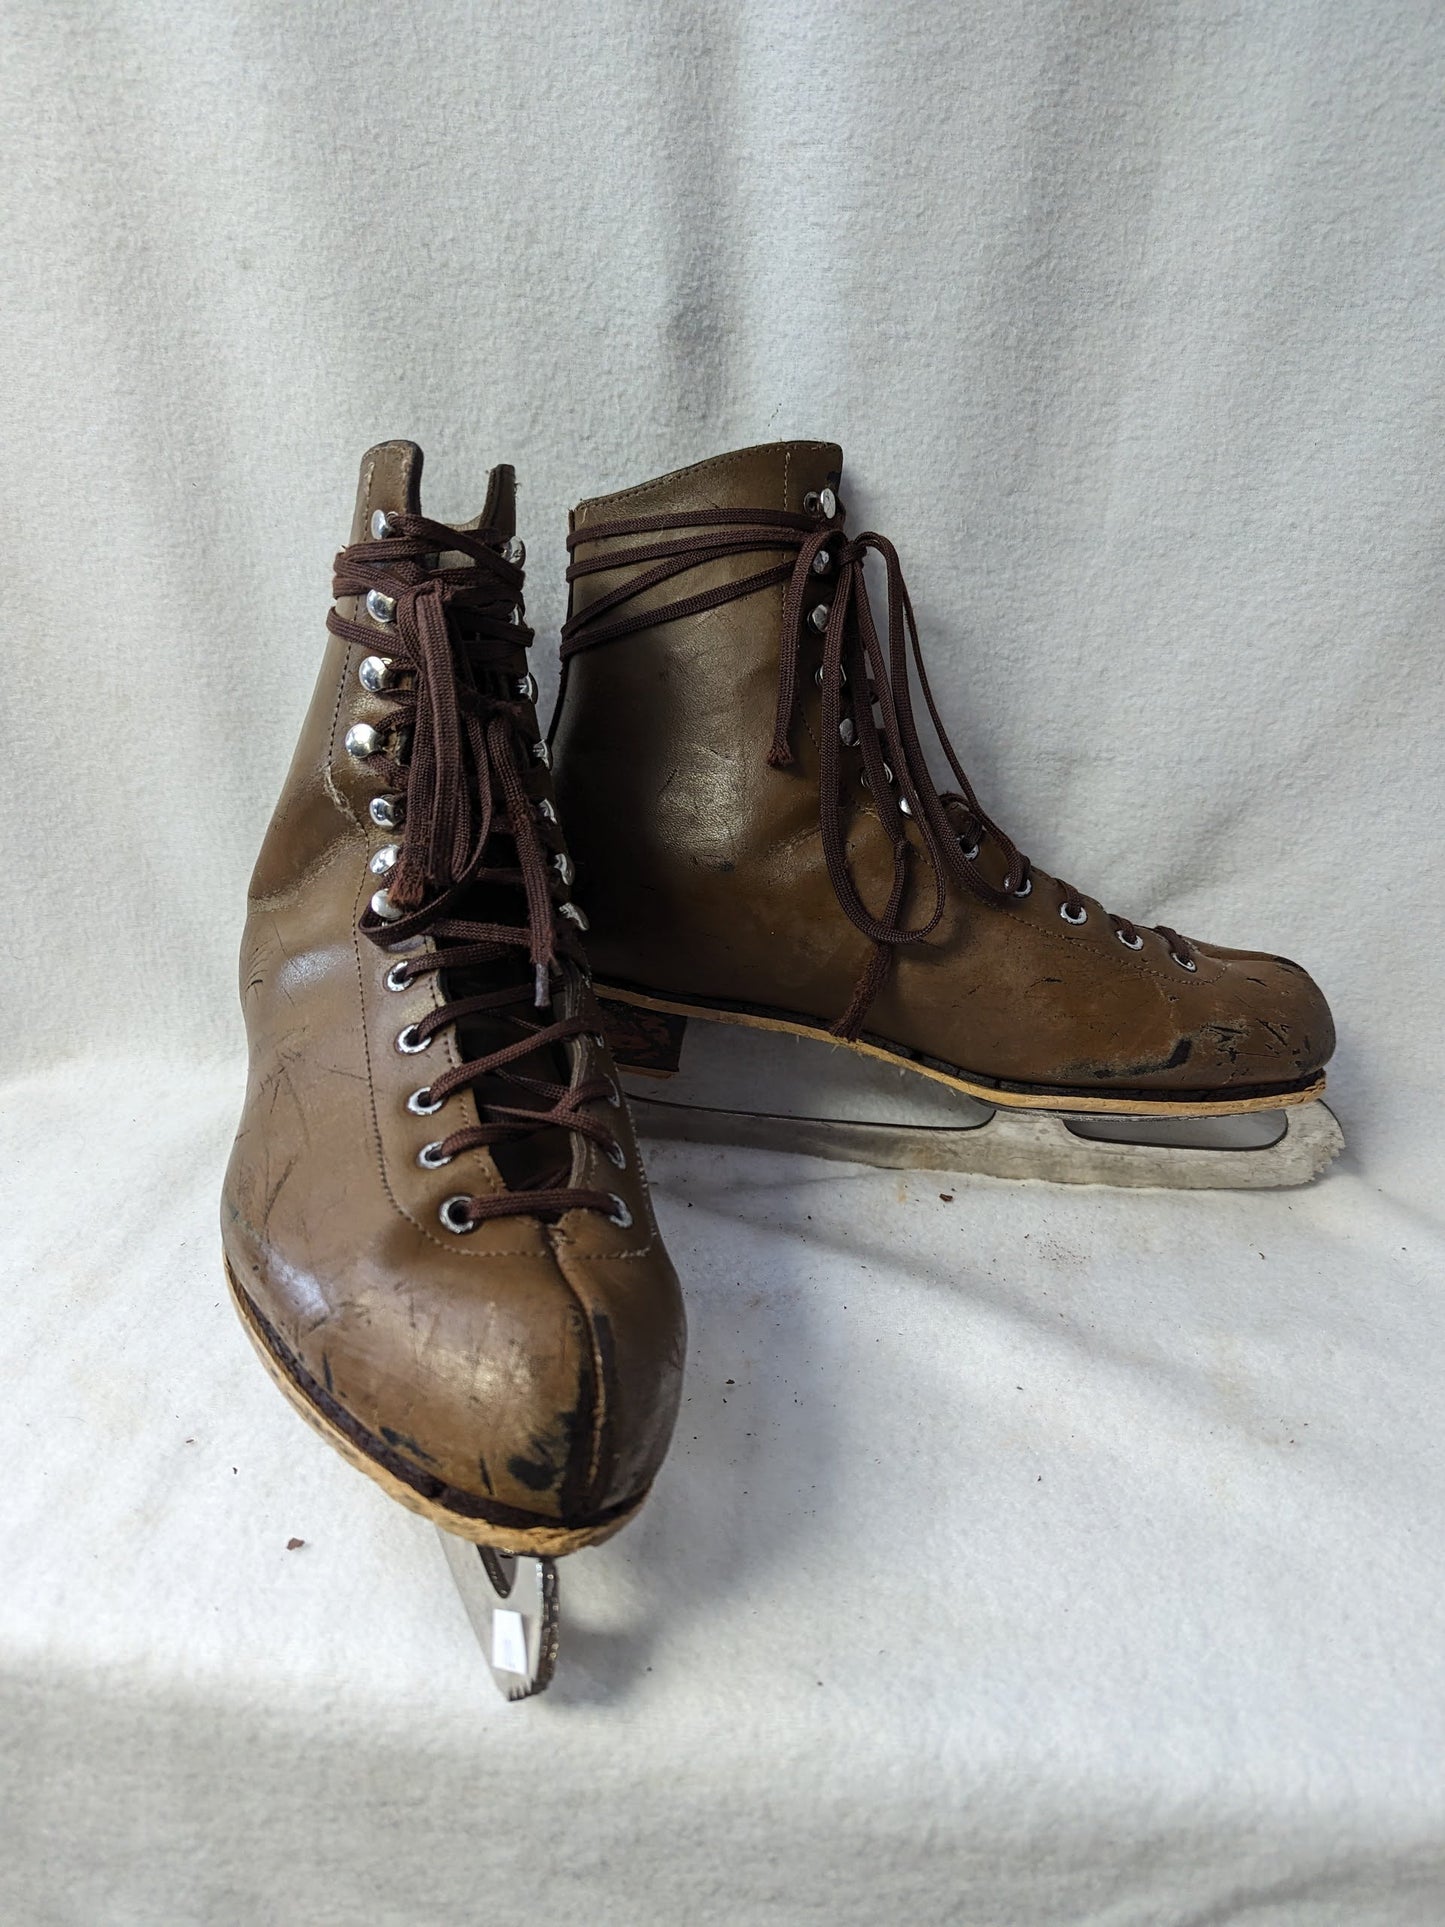 Rink Master Ice Skates Size 10 Color Brown Condition Used